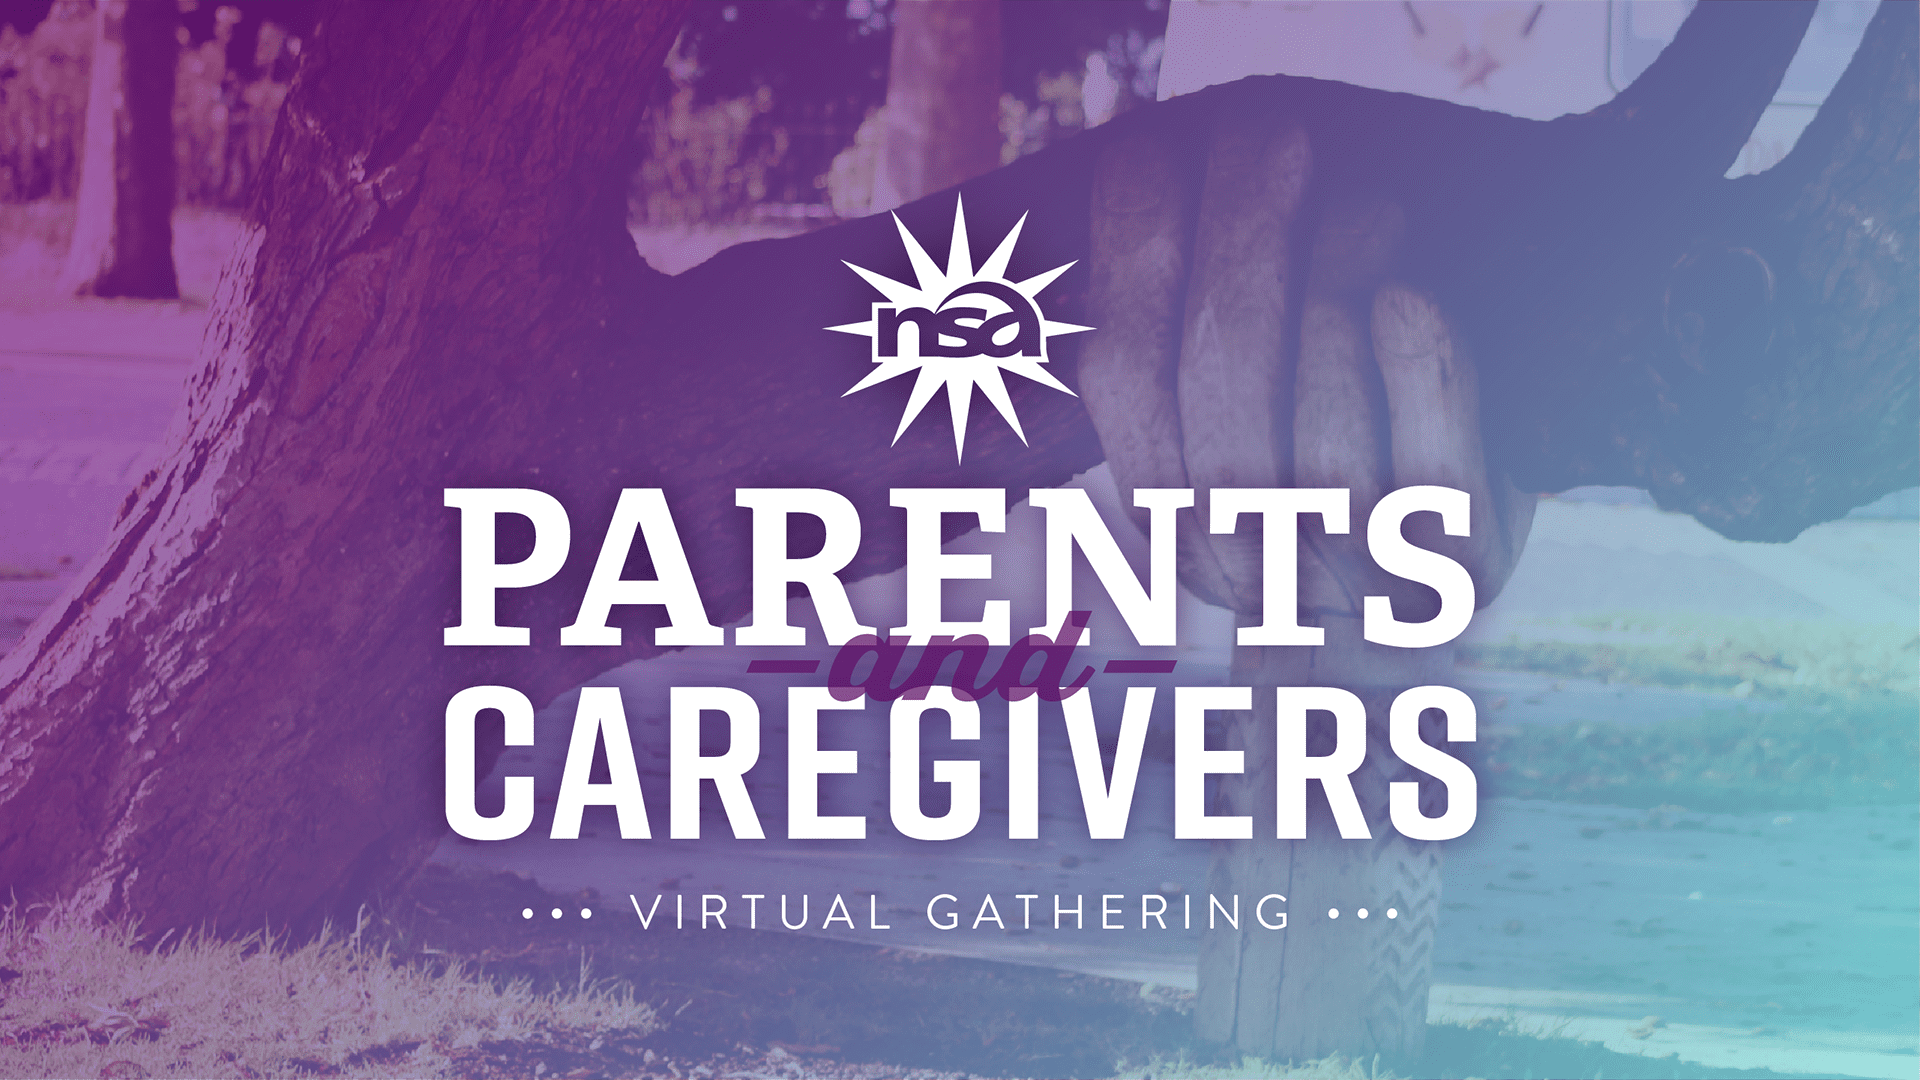 The image features the text "Parents and Caregivers Virtual Gathering" with "and" crossed out. The NEA (National Education Association) logo is displayed above. The background shows a large sculpture of hands embracing a tree trunk, blending from purple to teal.